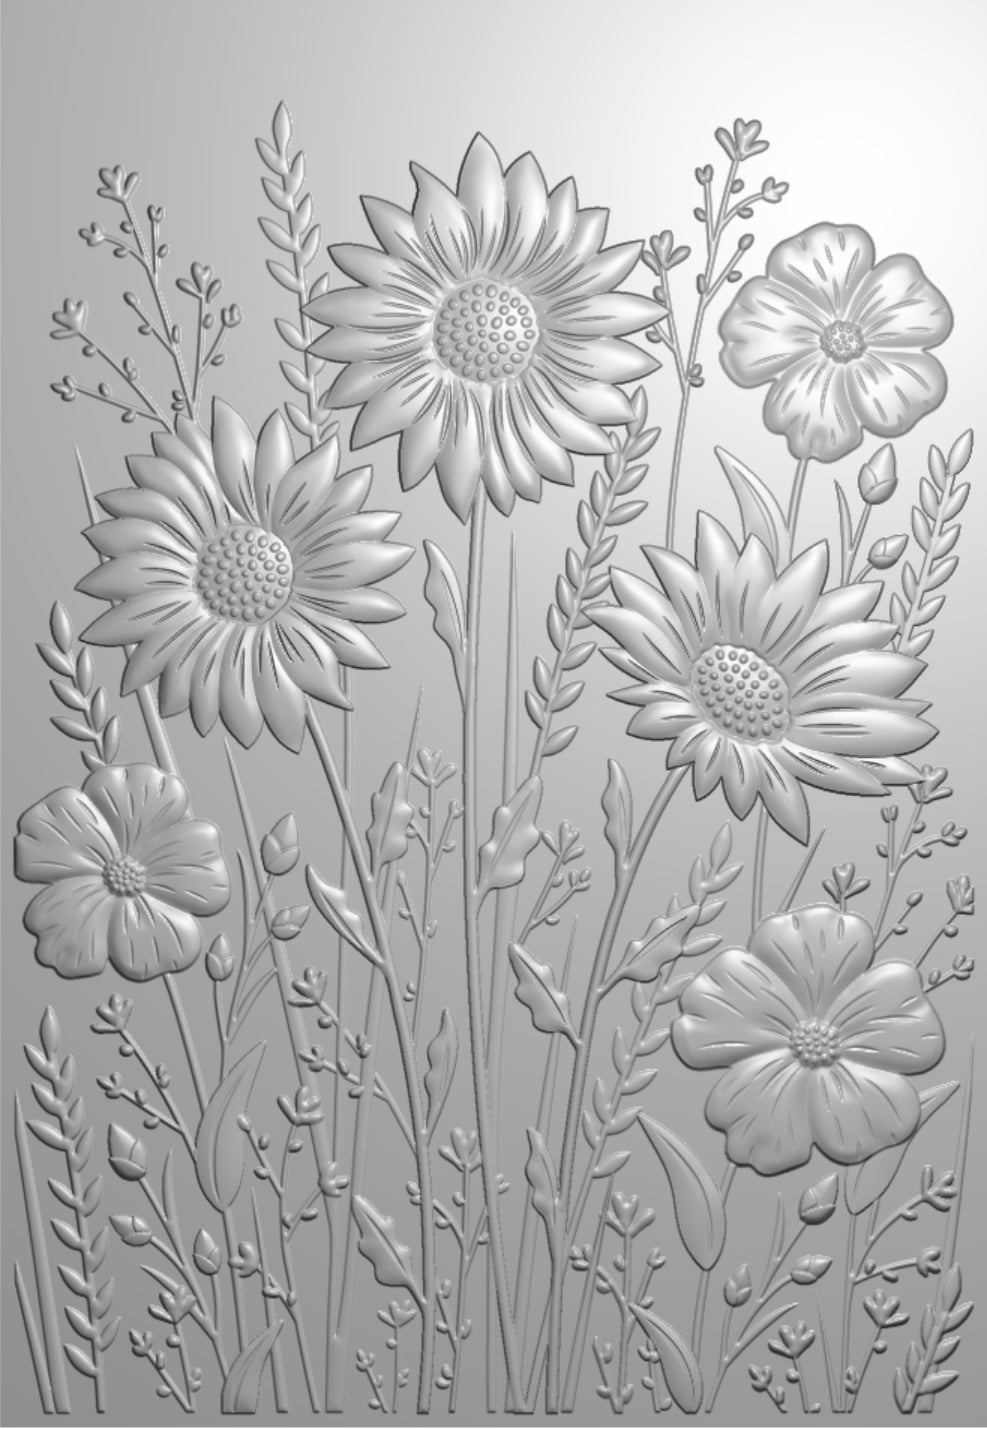 Creative Expressions Wildflowers 5 in x 7 in 3D Embossing Folder